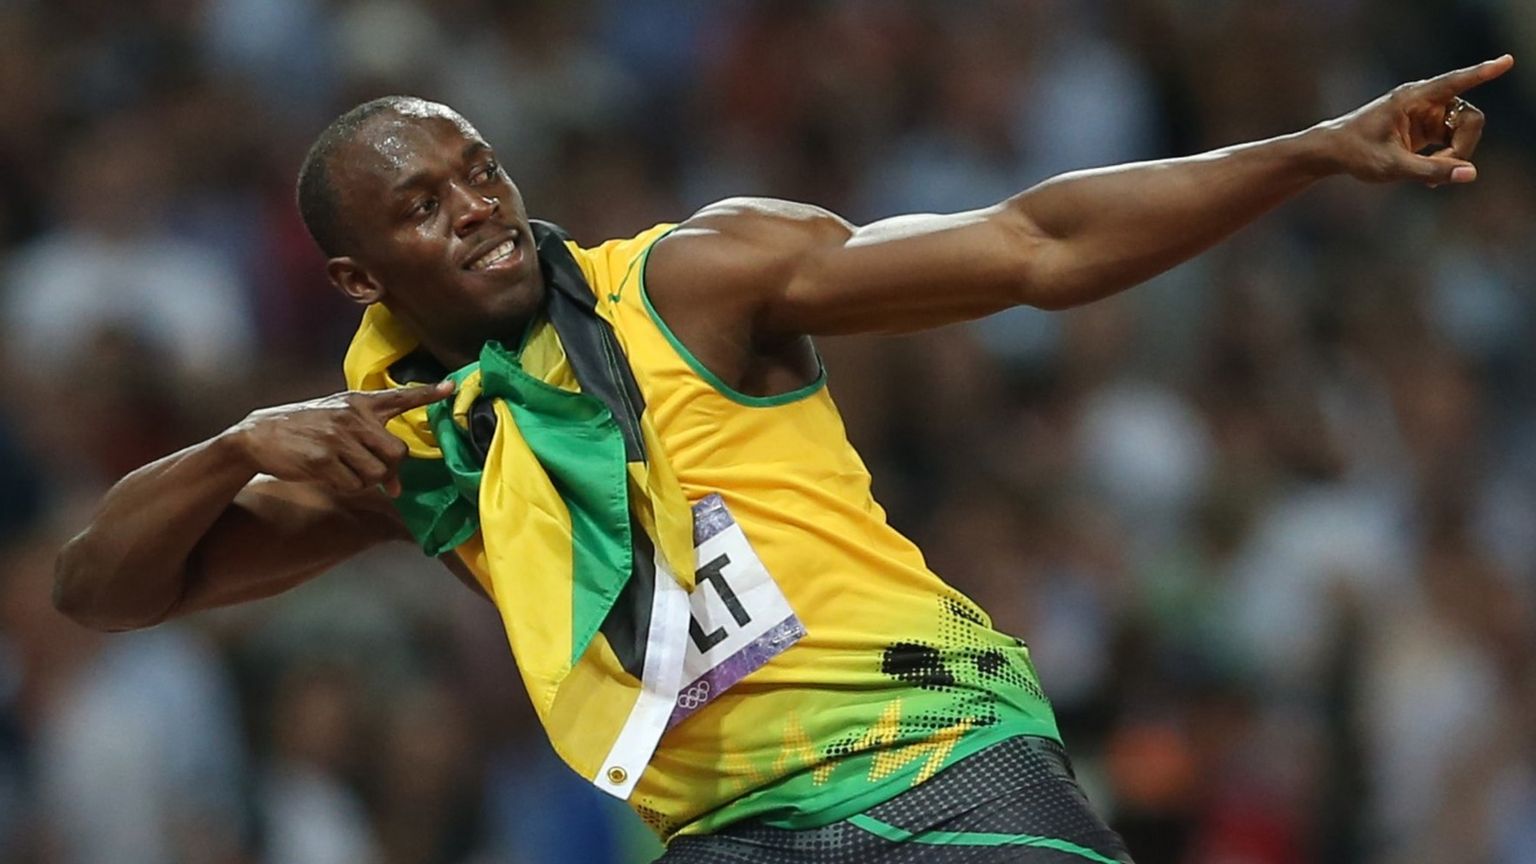 Usain Bolt celebrates after he wins gold during the Men's 200m final at the London 20212 Olympic Games.